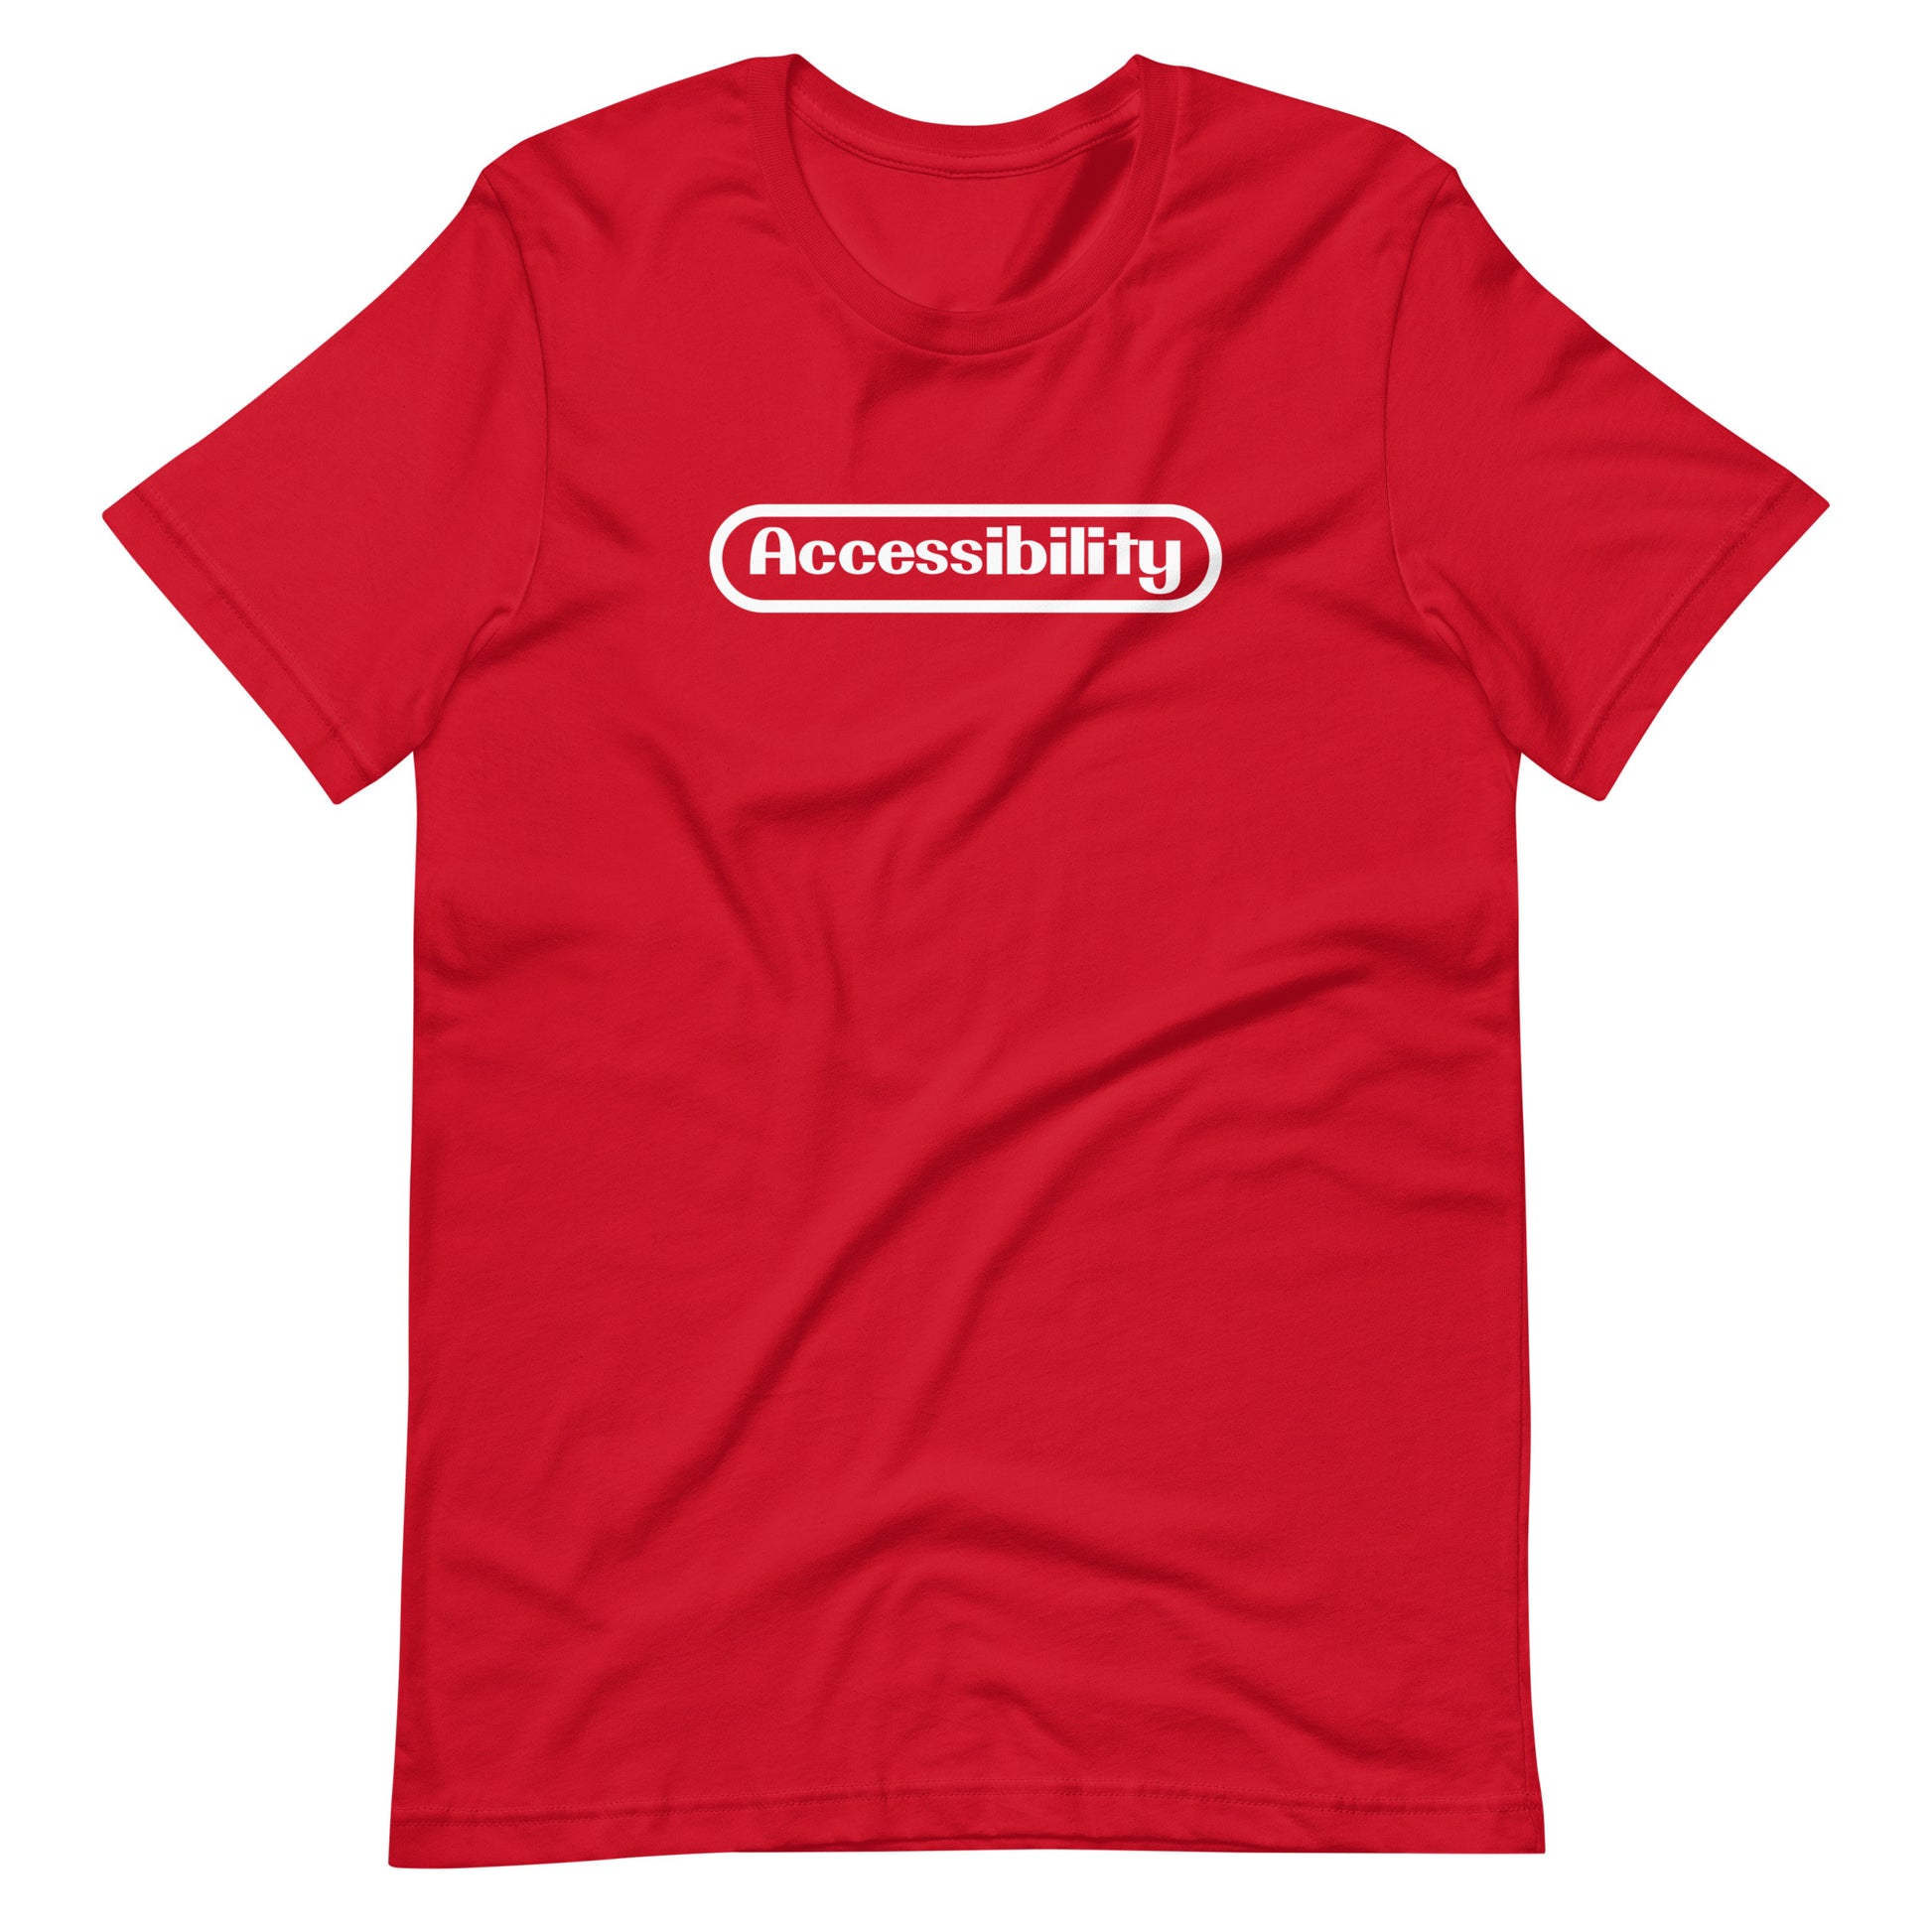 White stylized Accessibility word with rounded border, prepresentative of the Nintent logo, center aligned, on front of red t-shirt.